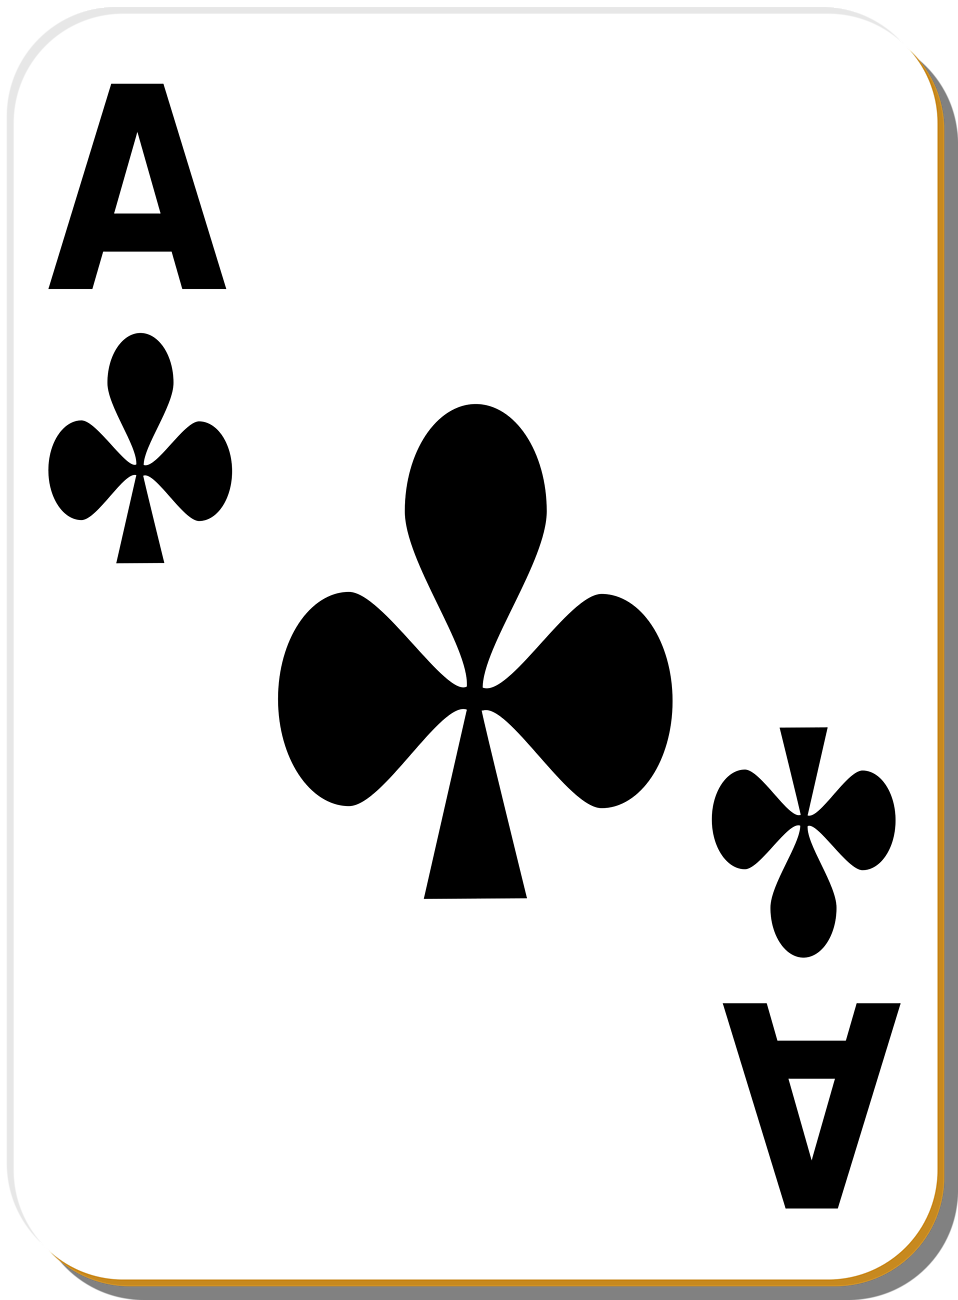 Playing Card | Free Stock Photo | Illustration of an Ace of Clubs 